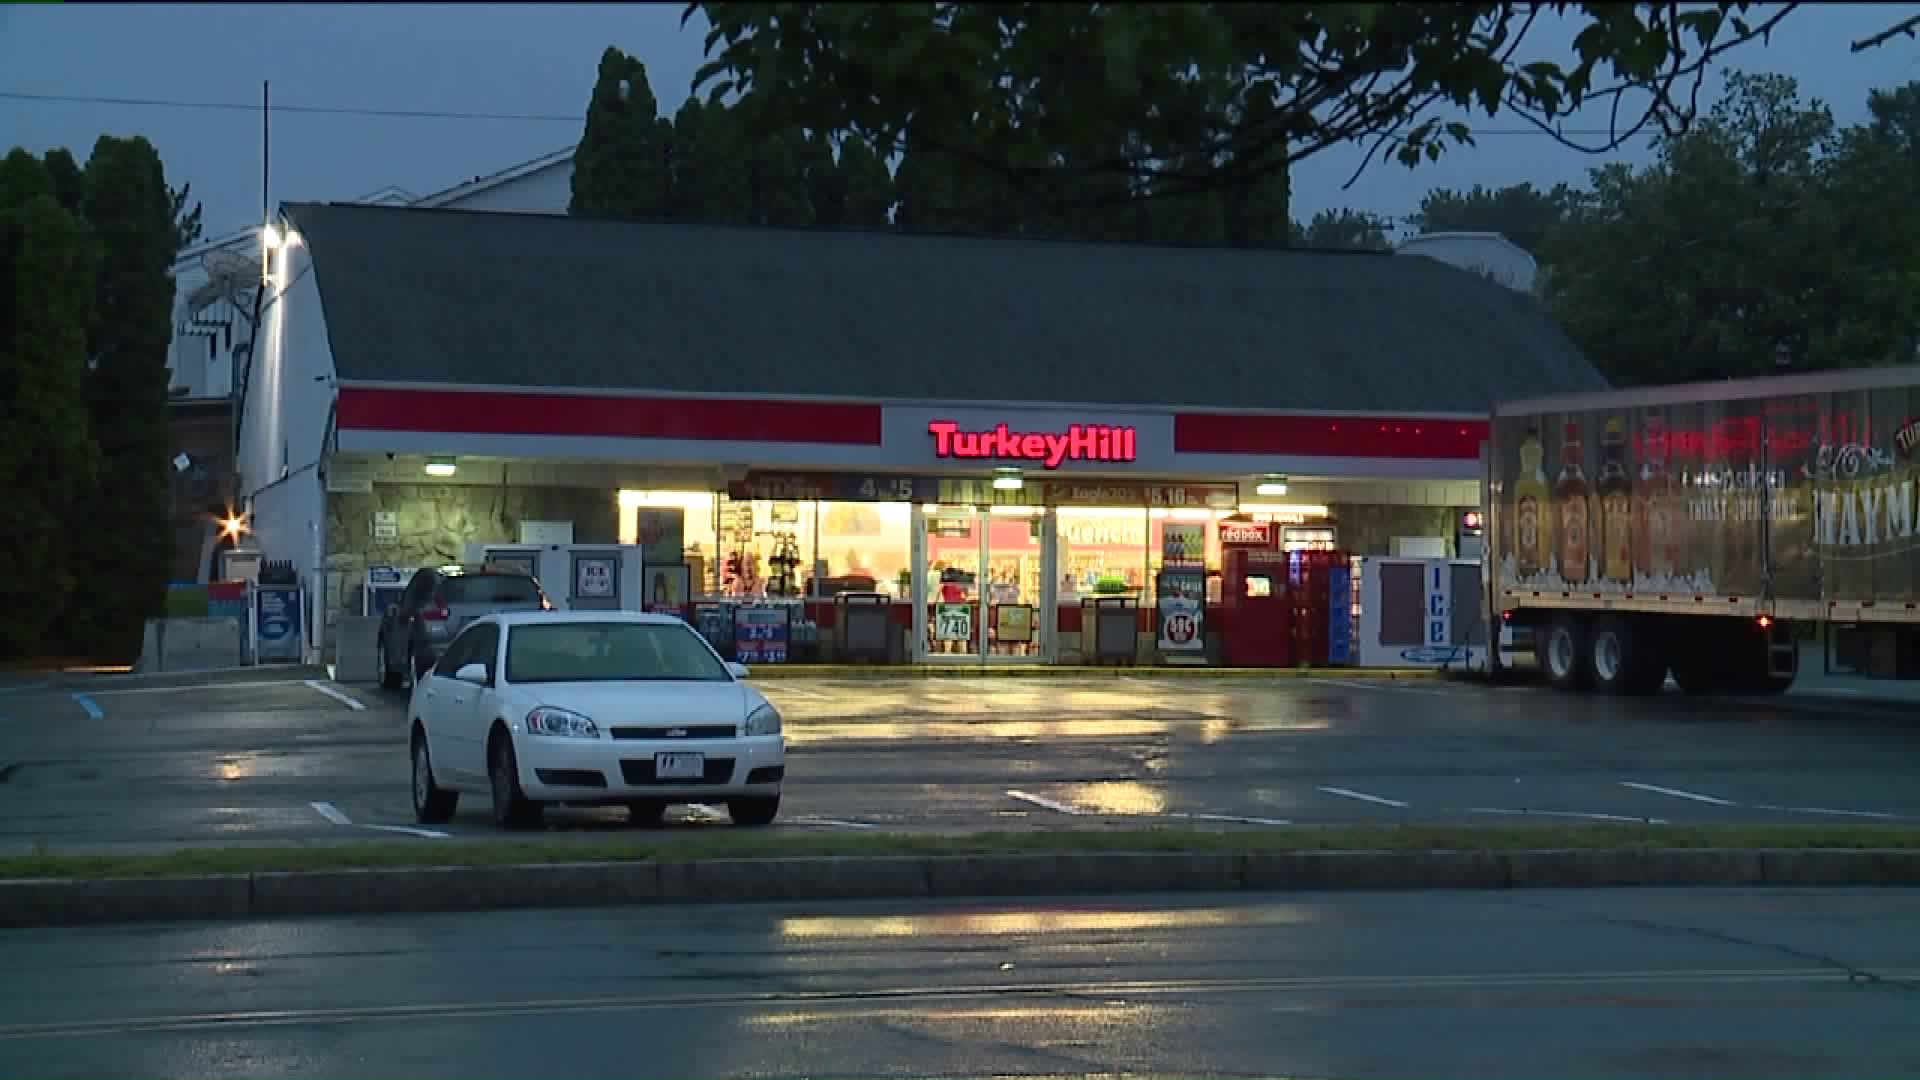 Turkey Hill Robbed in Wilkes-Barre